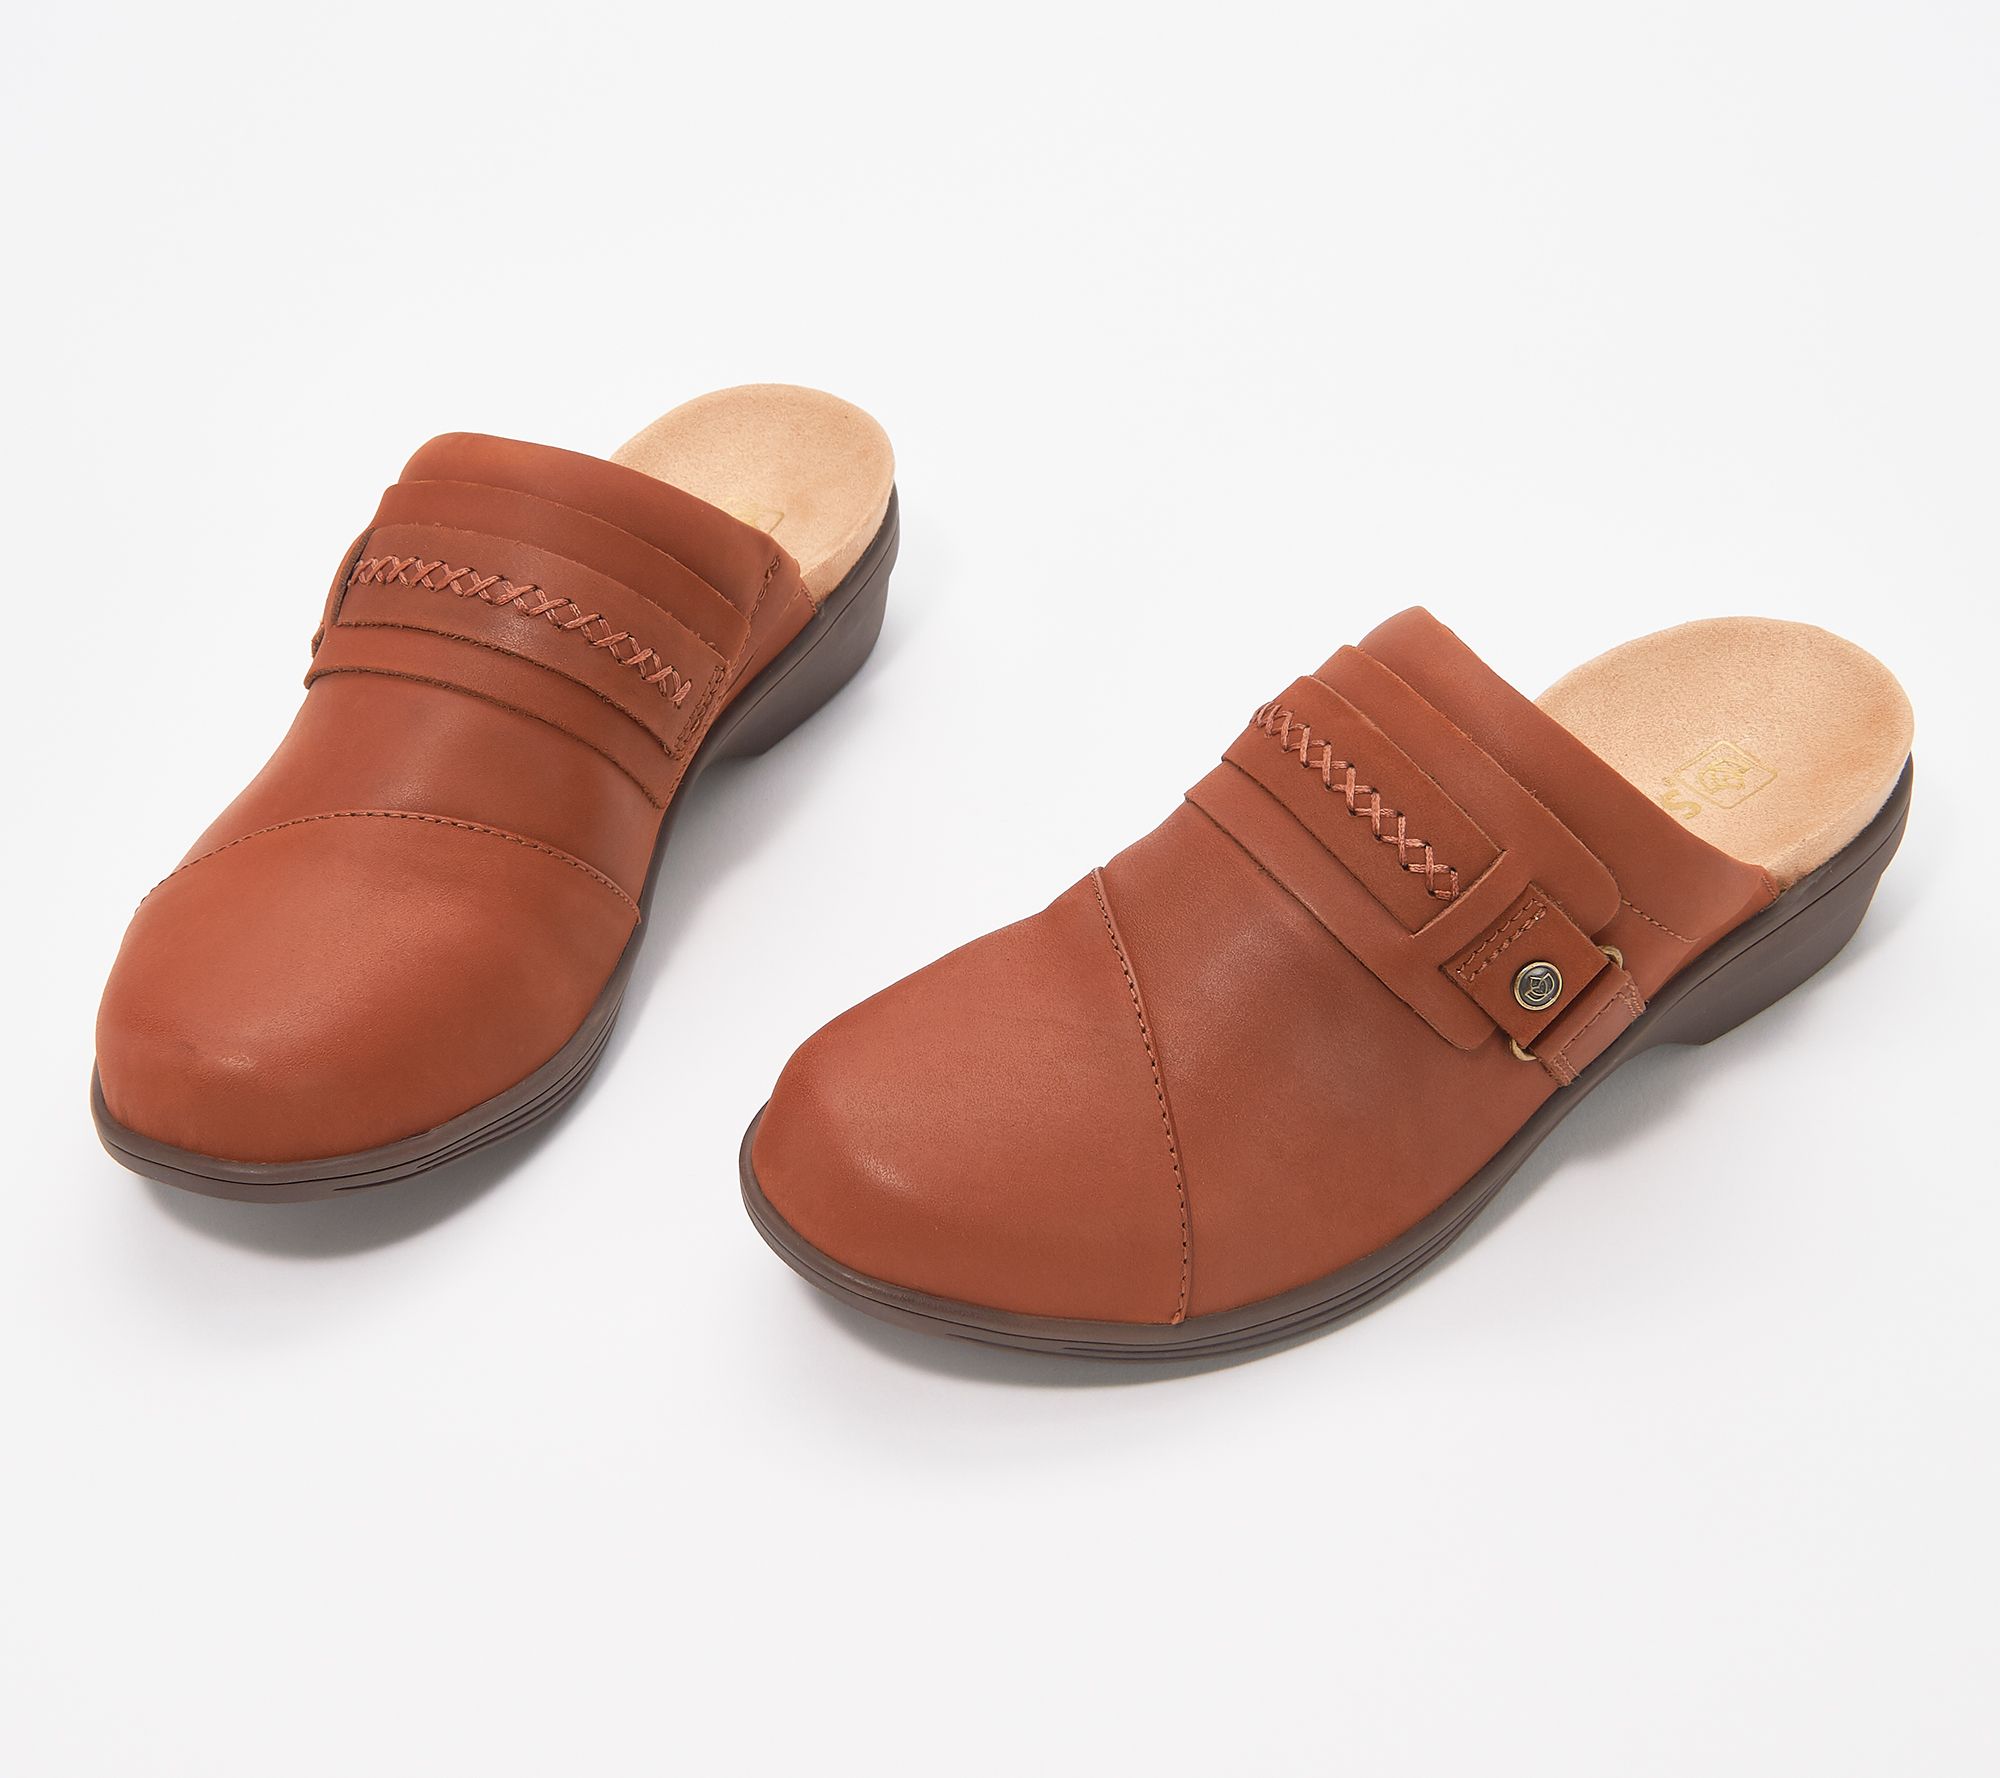 easy spirit clogs clearance